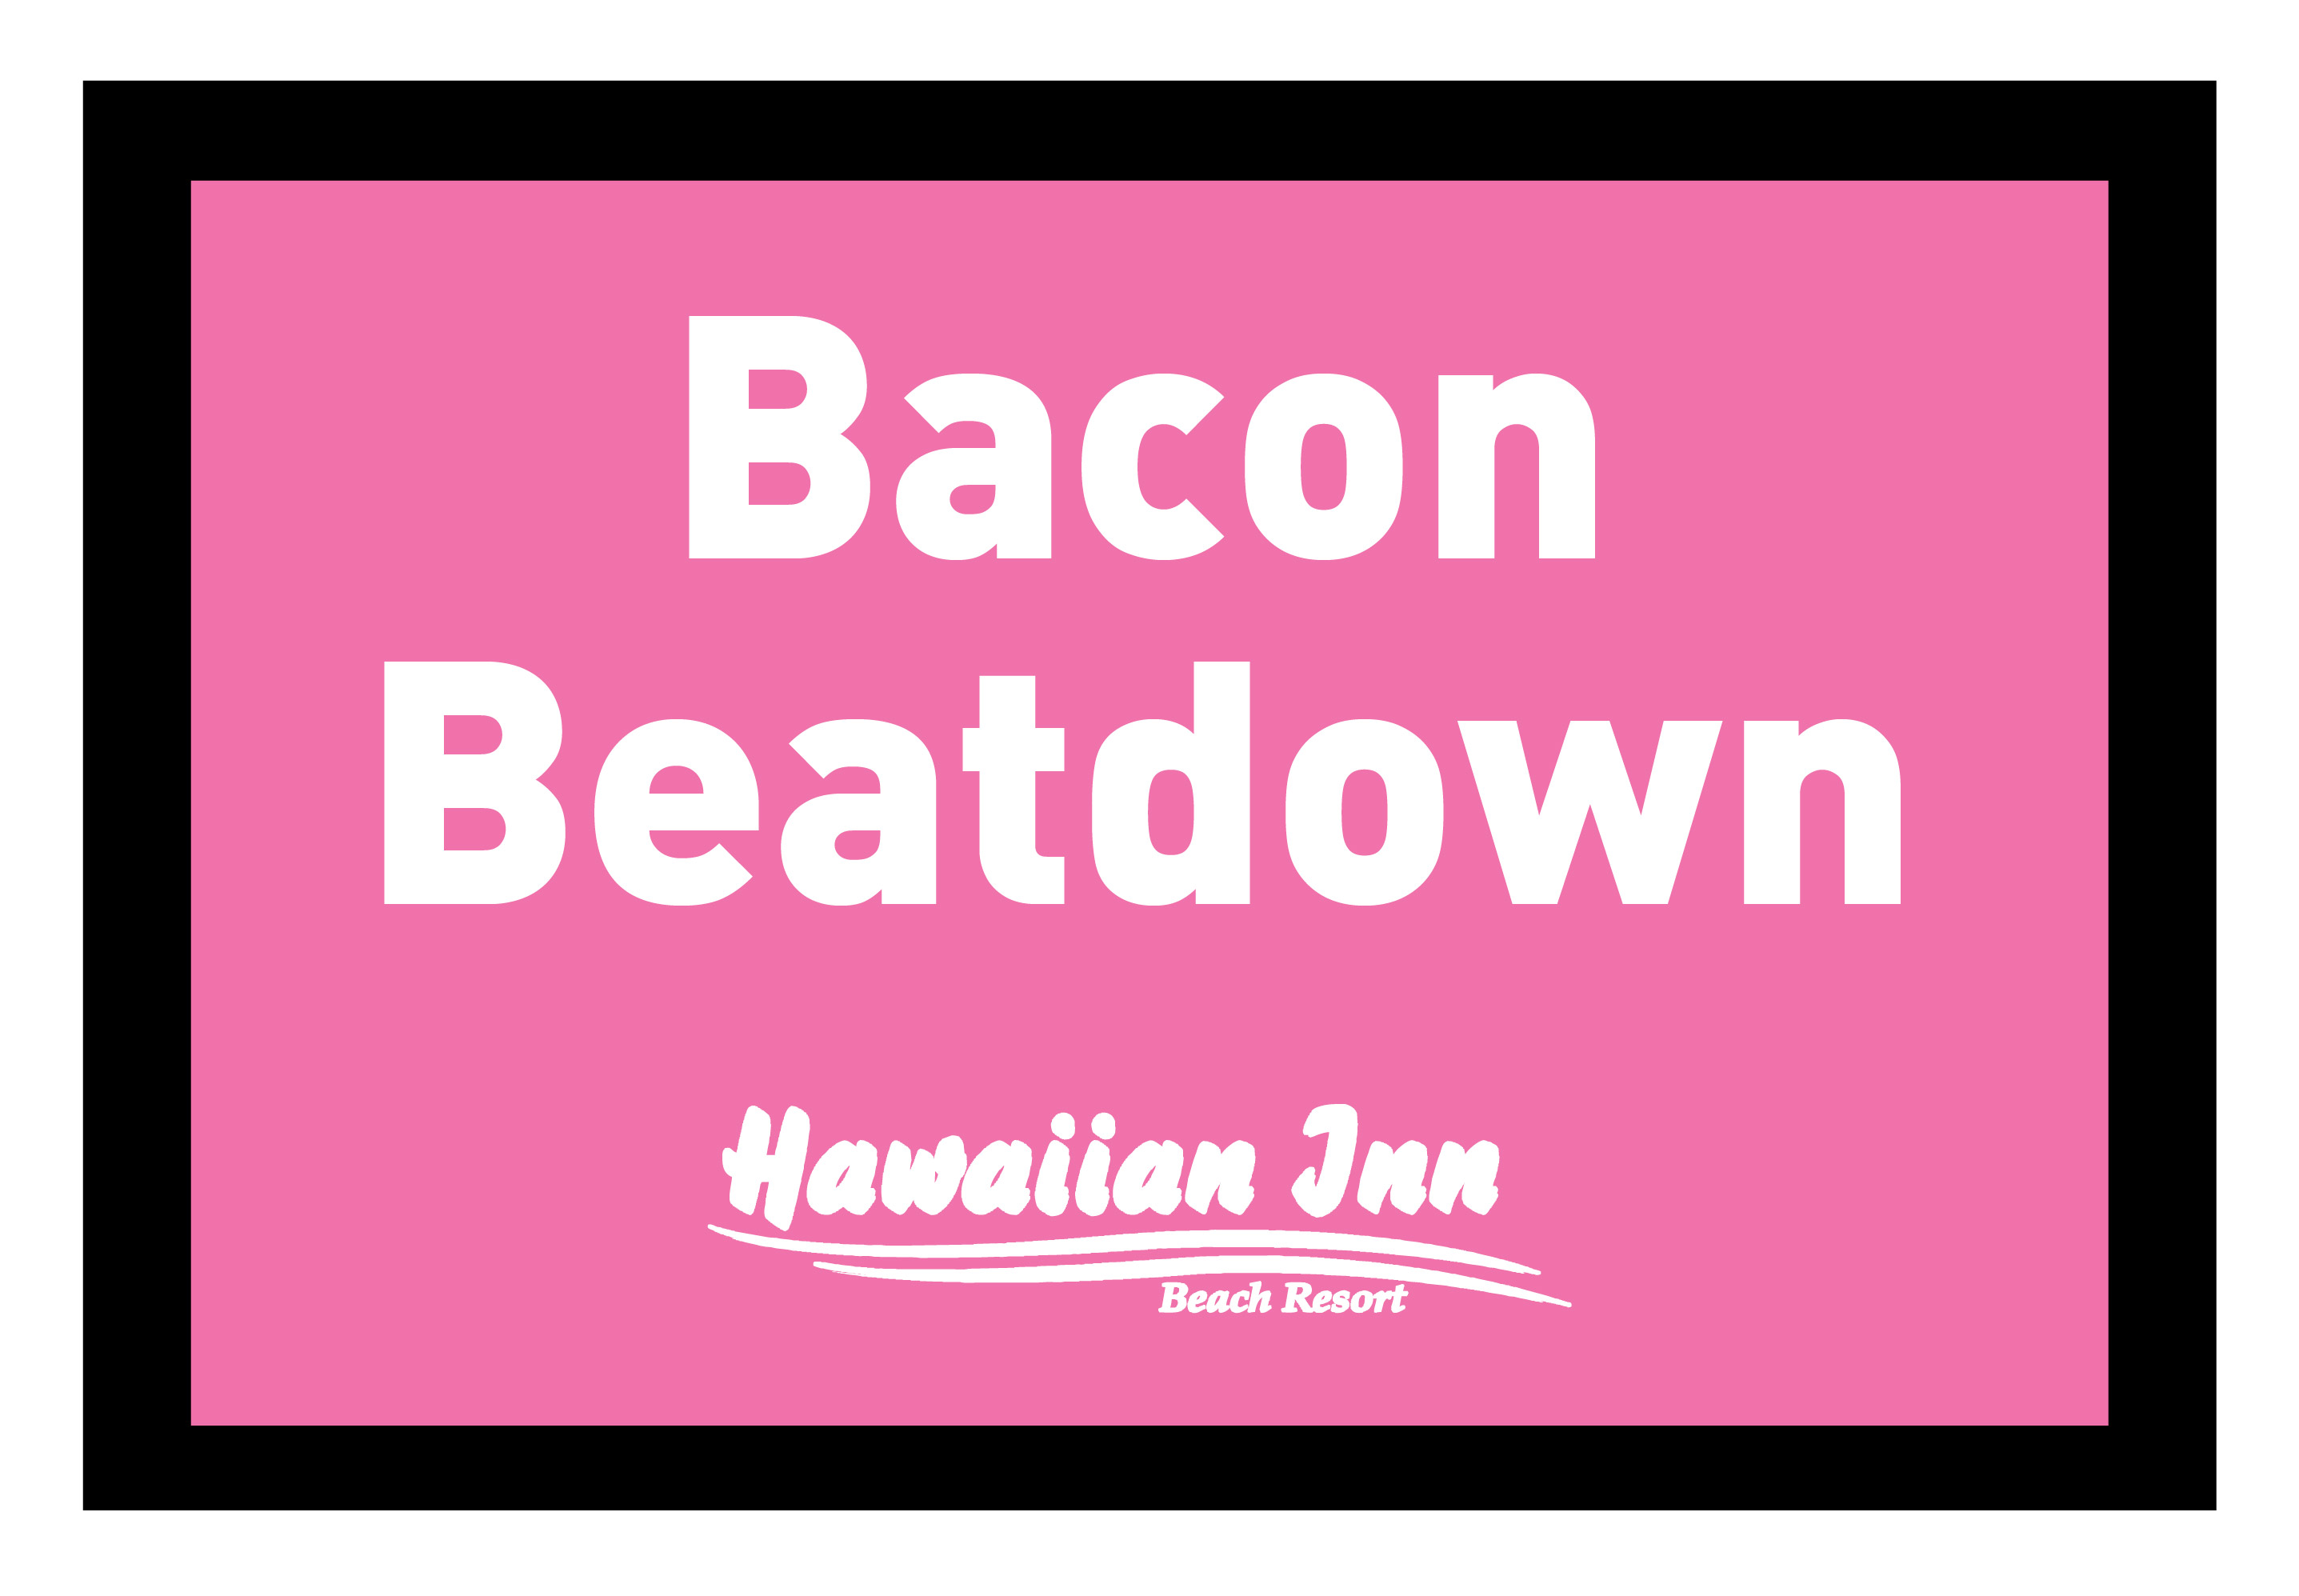 Bacon Beatdown 2015- A Food and Fitness Event in Daytona Beach